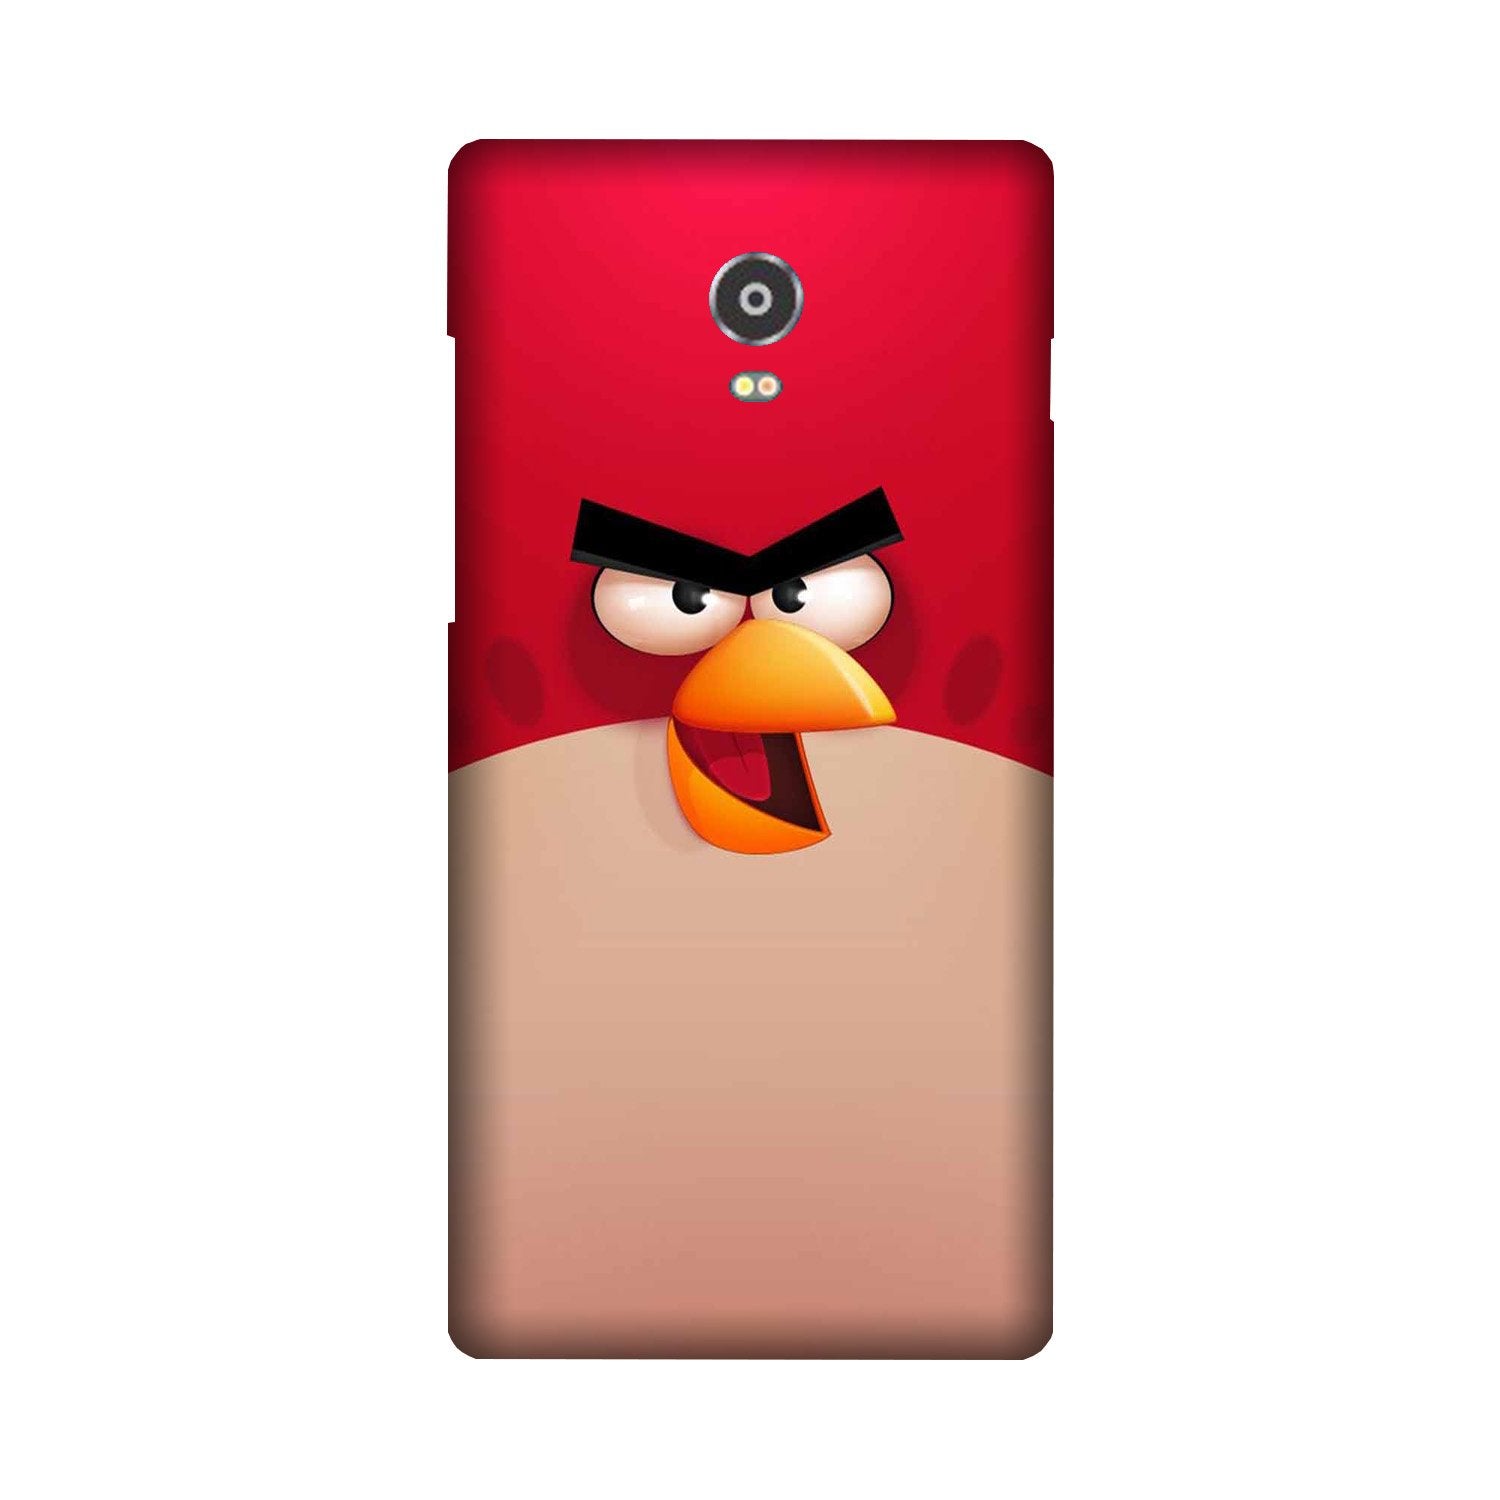 Angry Bird Red Mobile Back Case for Lenovo Vibe P1 (Design - 325)